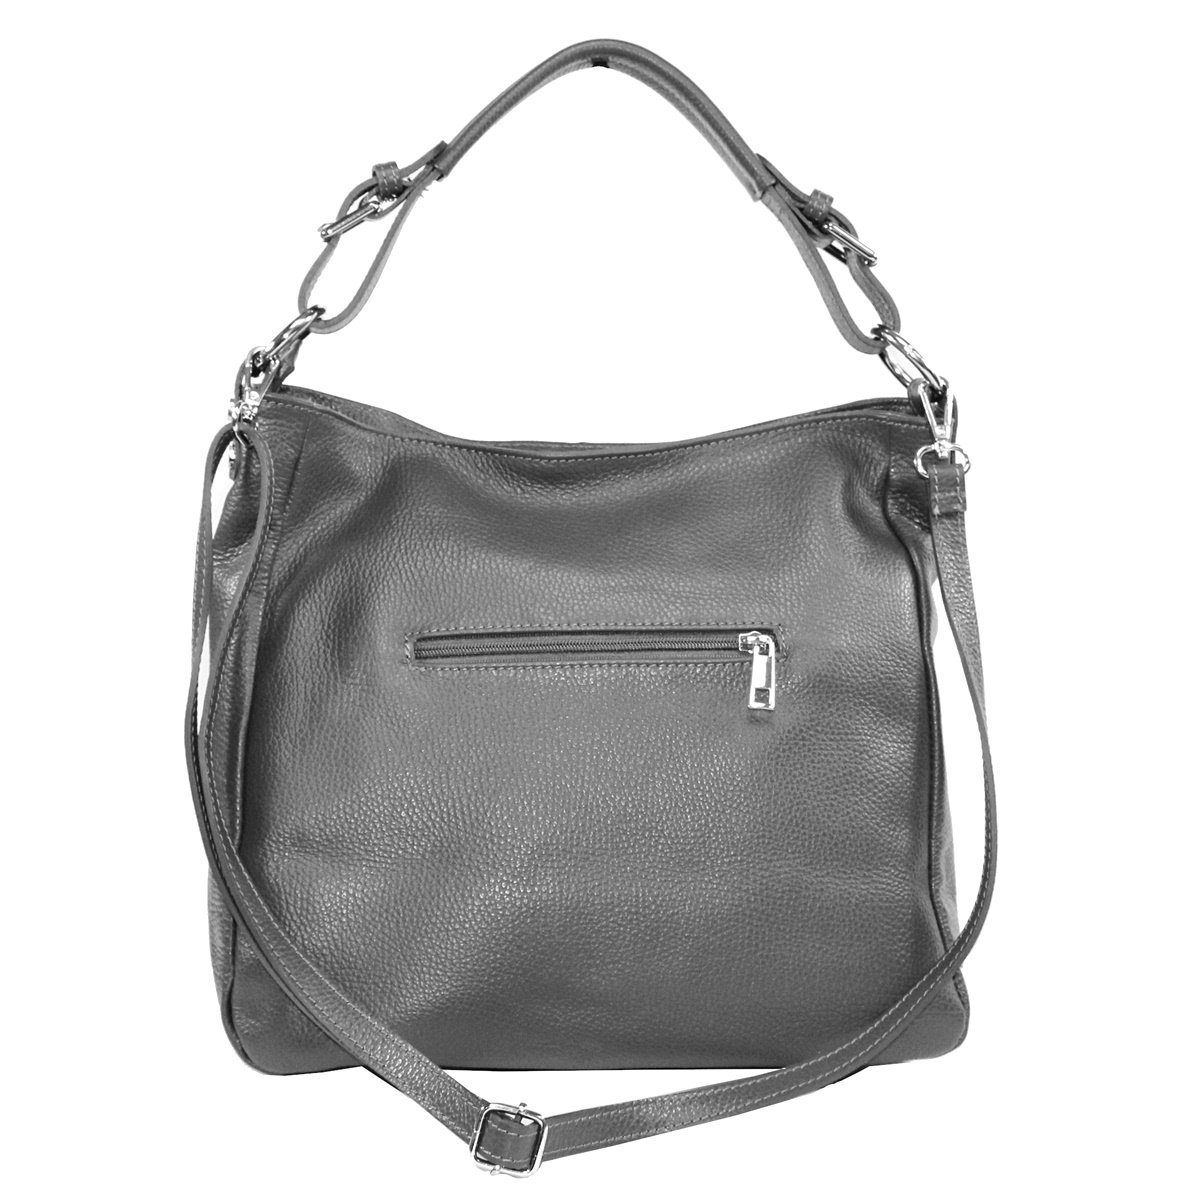 Handtasche Grau fs7142, in fs-bags Italy Made